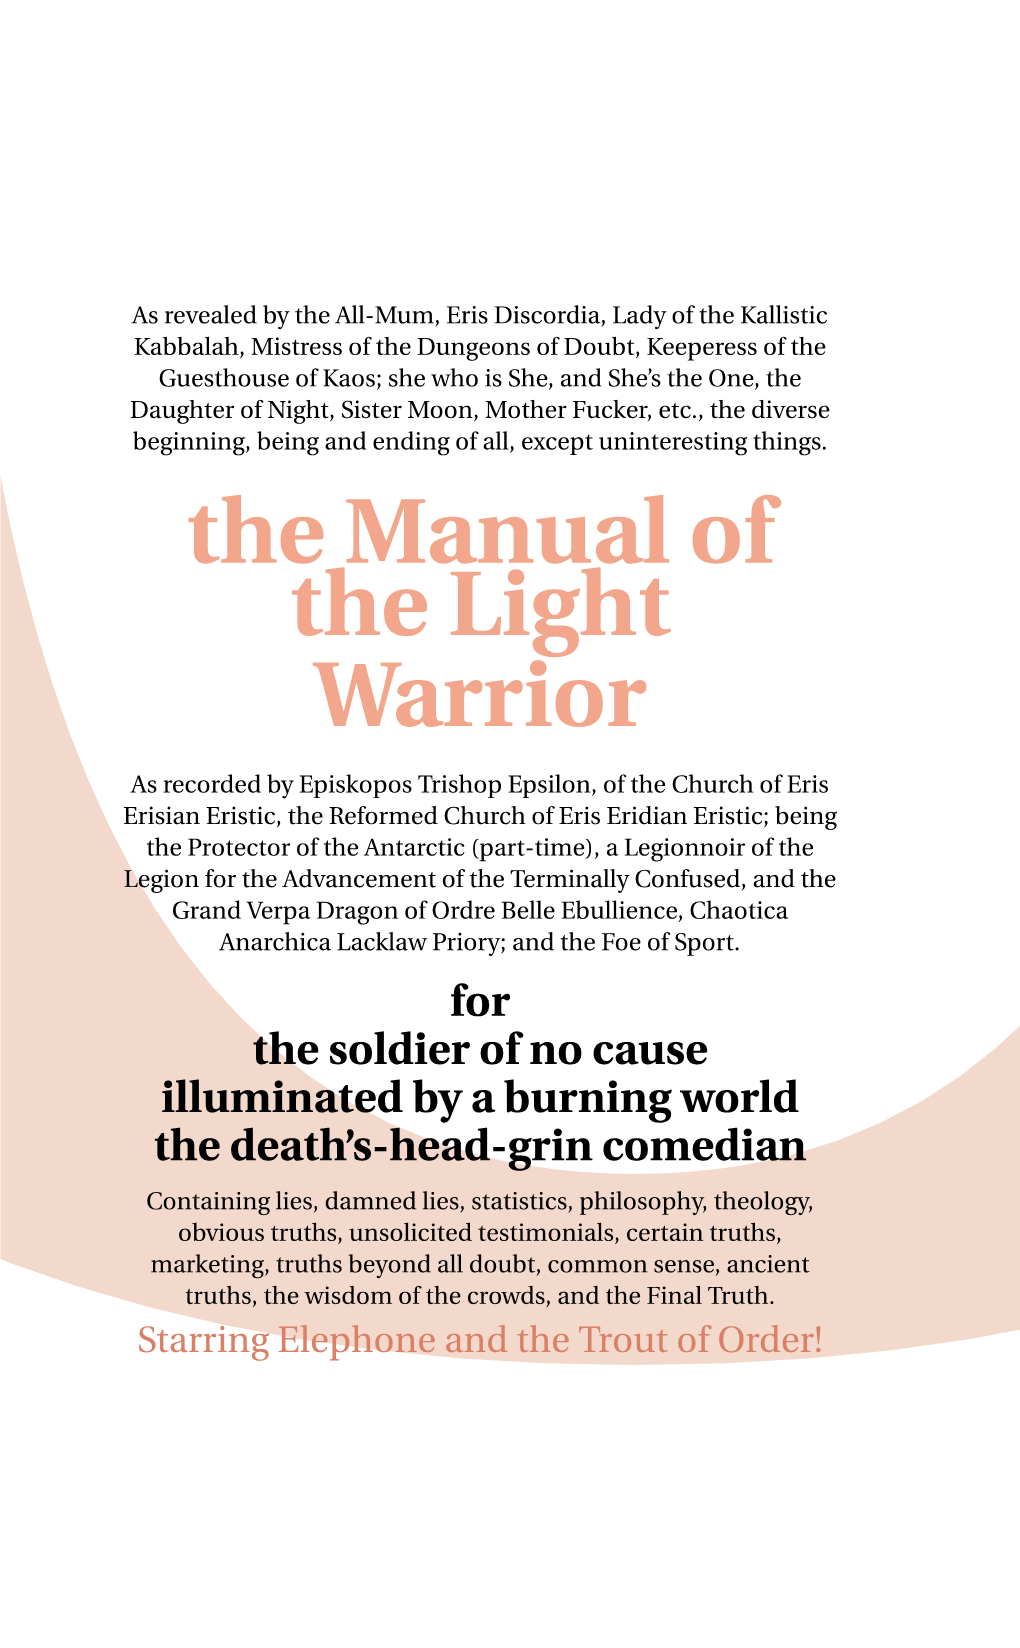 The Manual of the Light Warrior